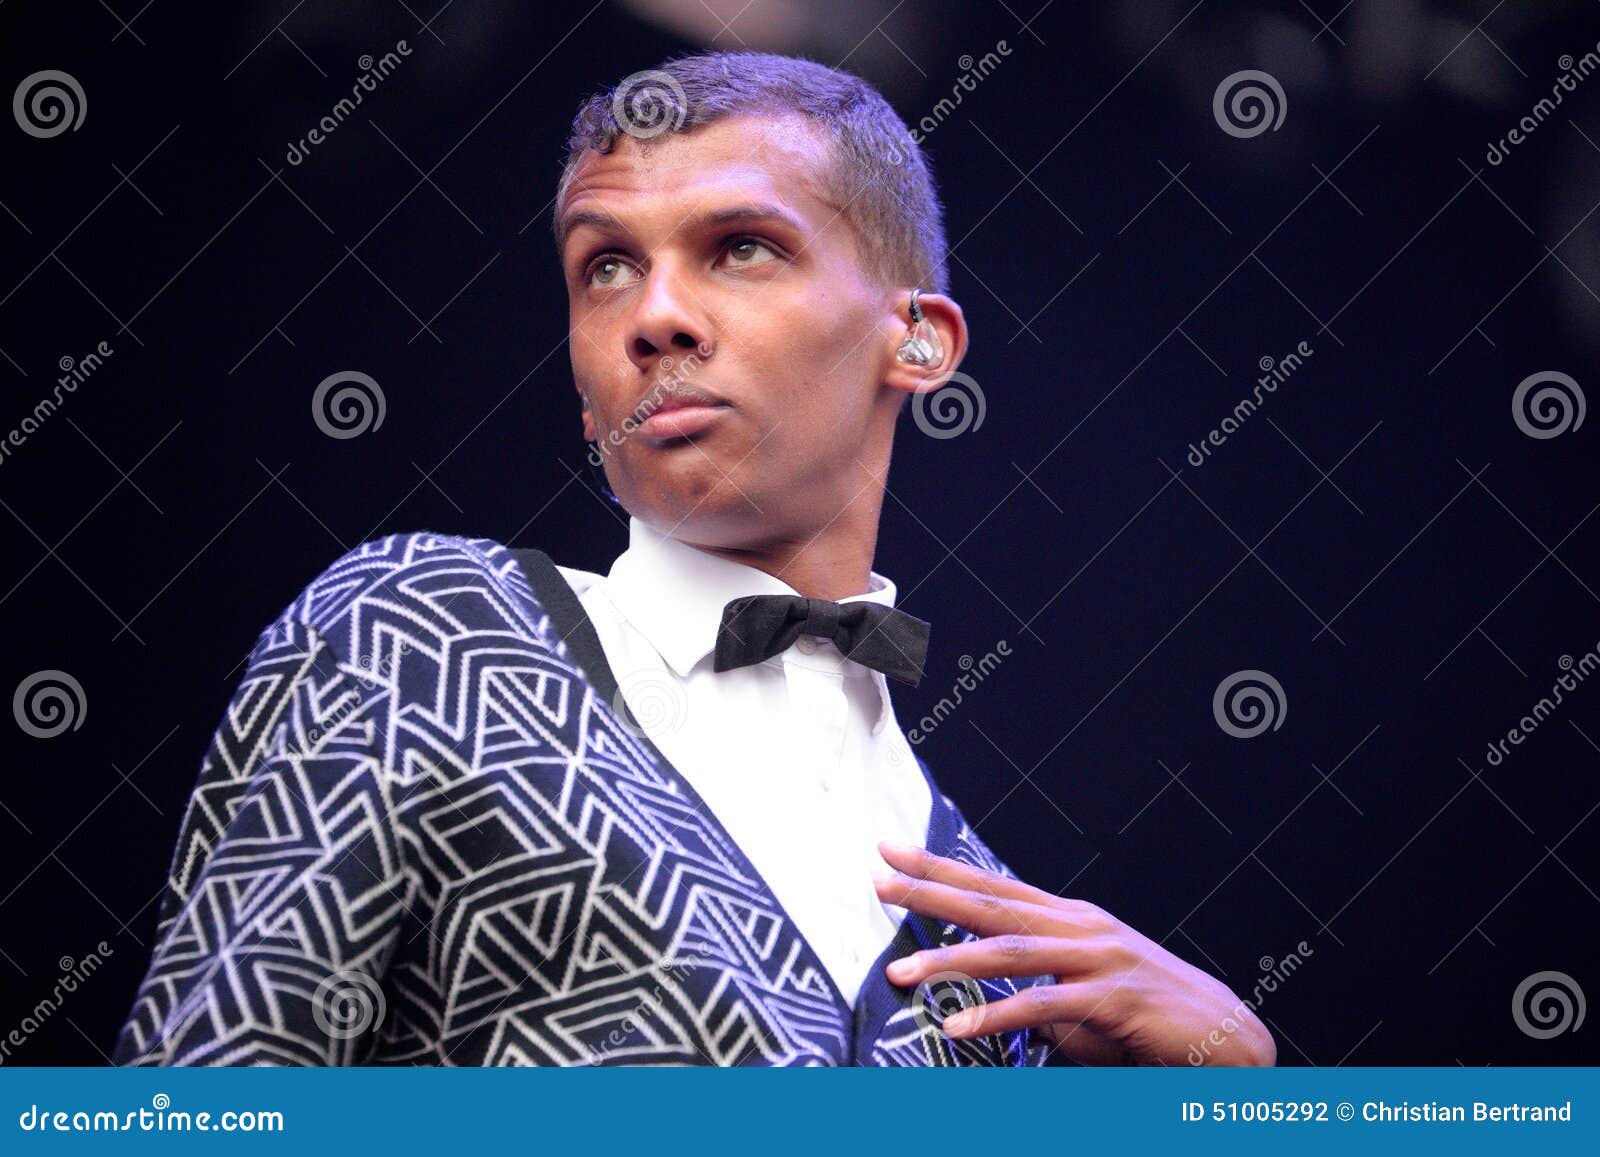 Stromae, Belgian Singer Who Plays House, New Beat and Electronic Music  Editorial Photography - Image of success, festival: 90632207